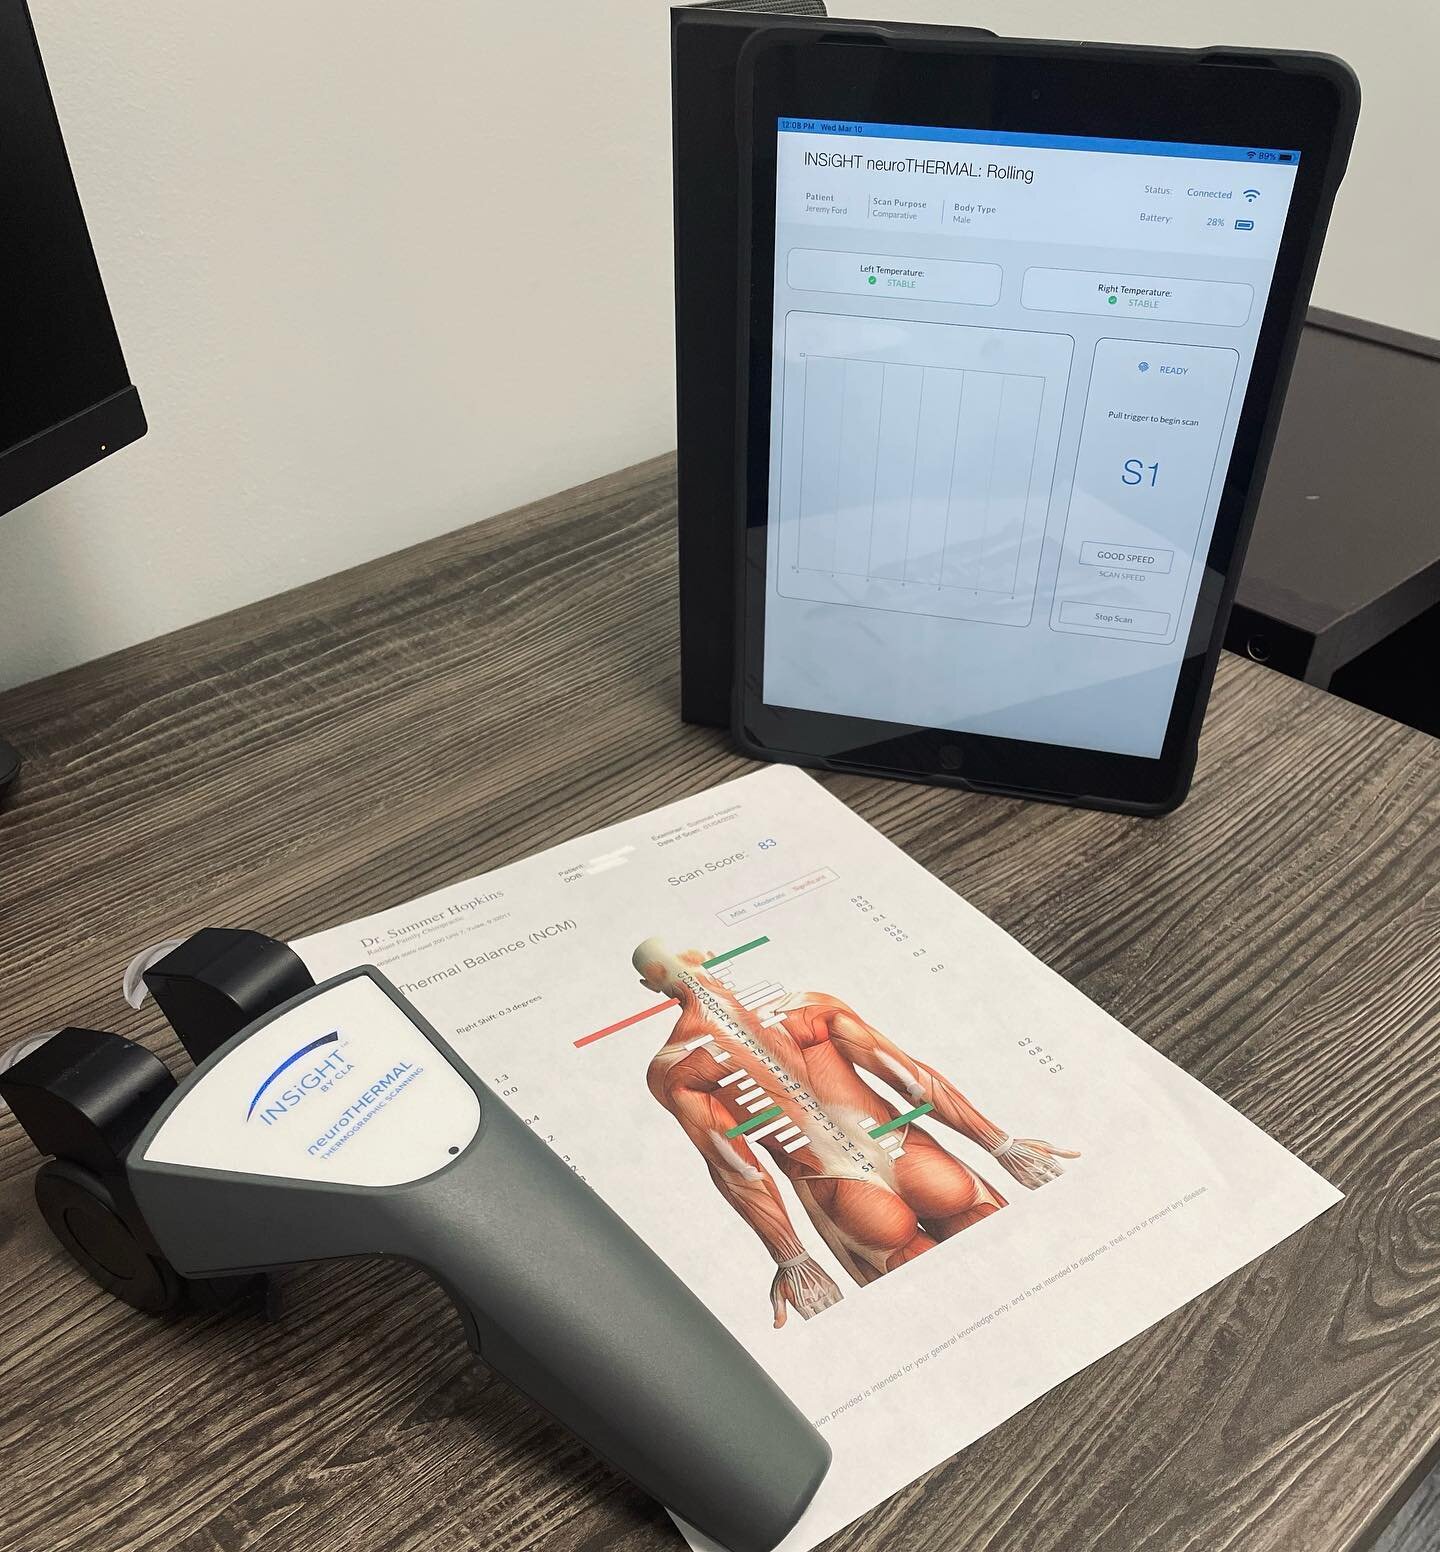 When was the last time you had your nervous system checked? 🤔
In our office, we use this state-of-the-art technology known as the CLA Insight Scanner to better understand how well your nervous system is functioning! This scans gives us immediate res